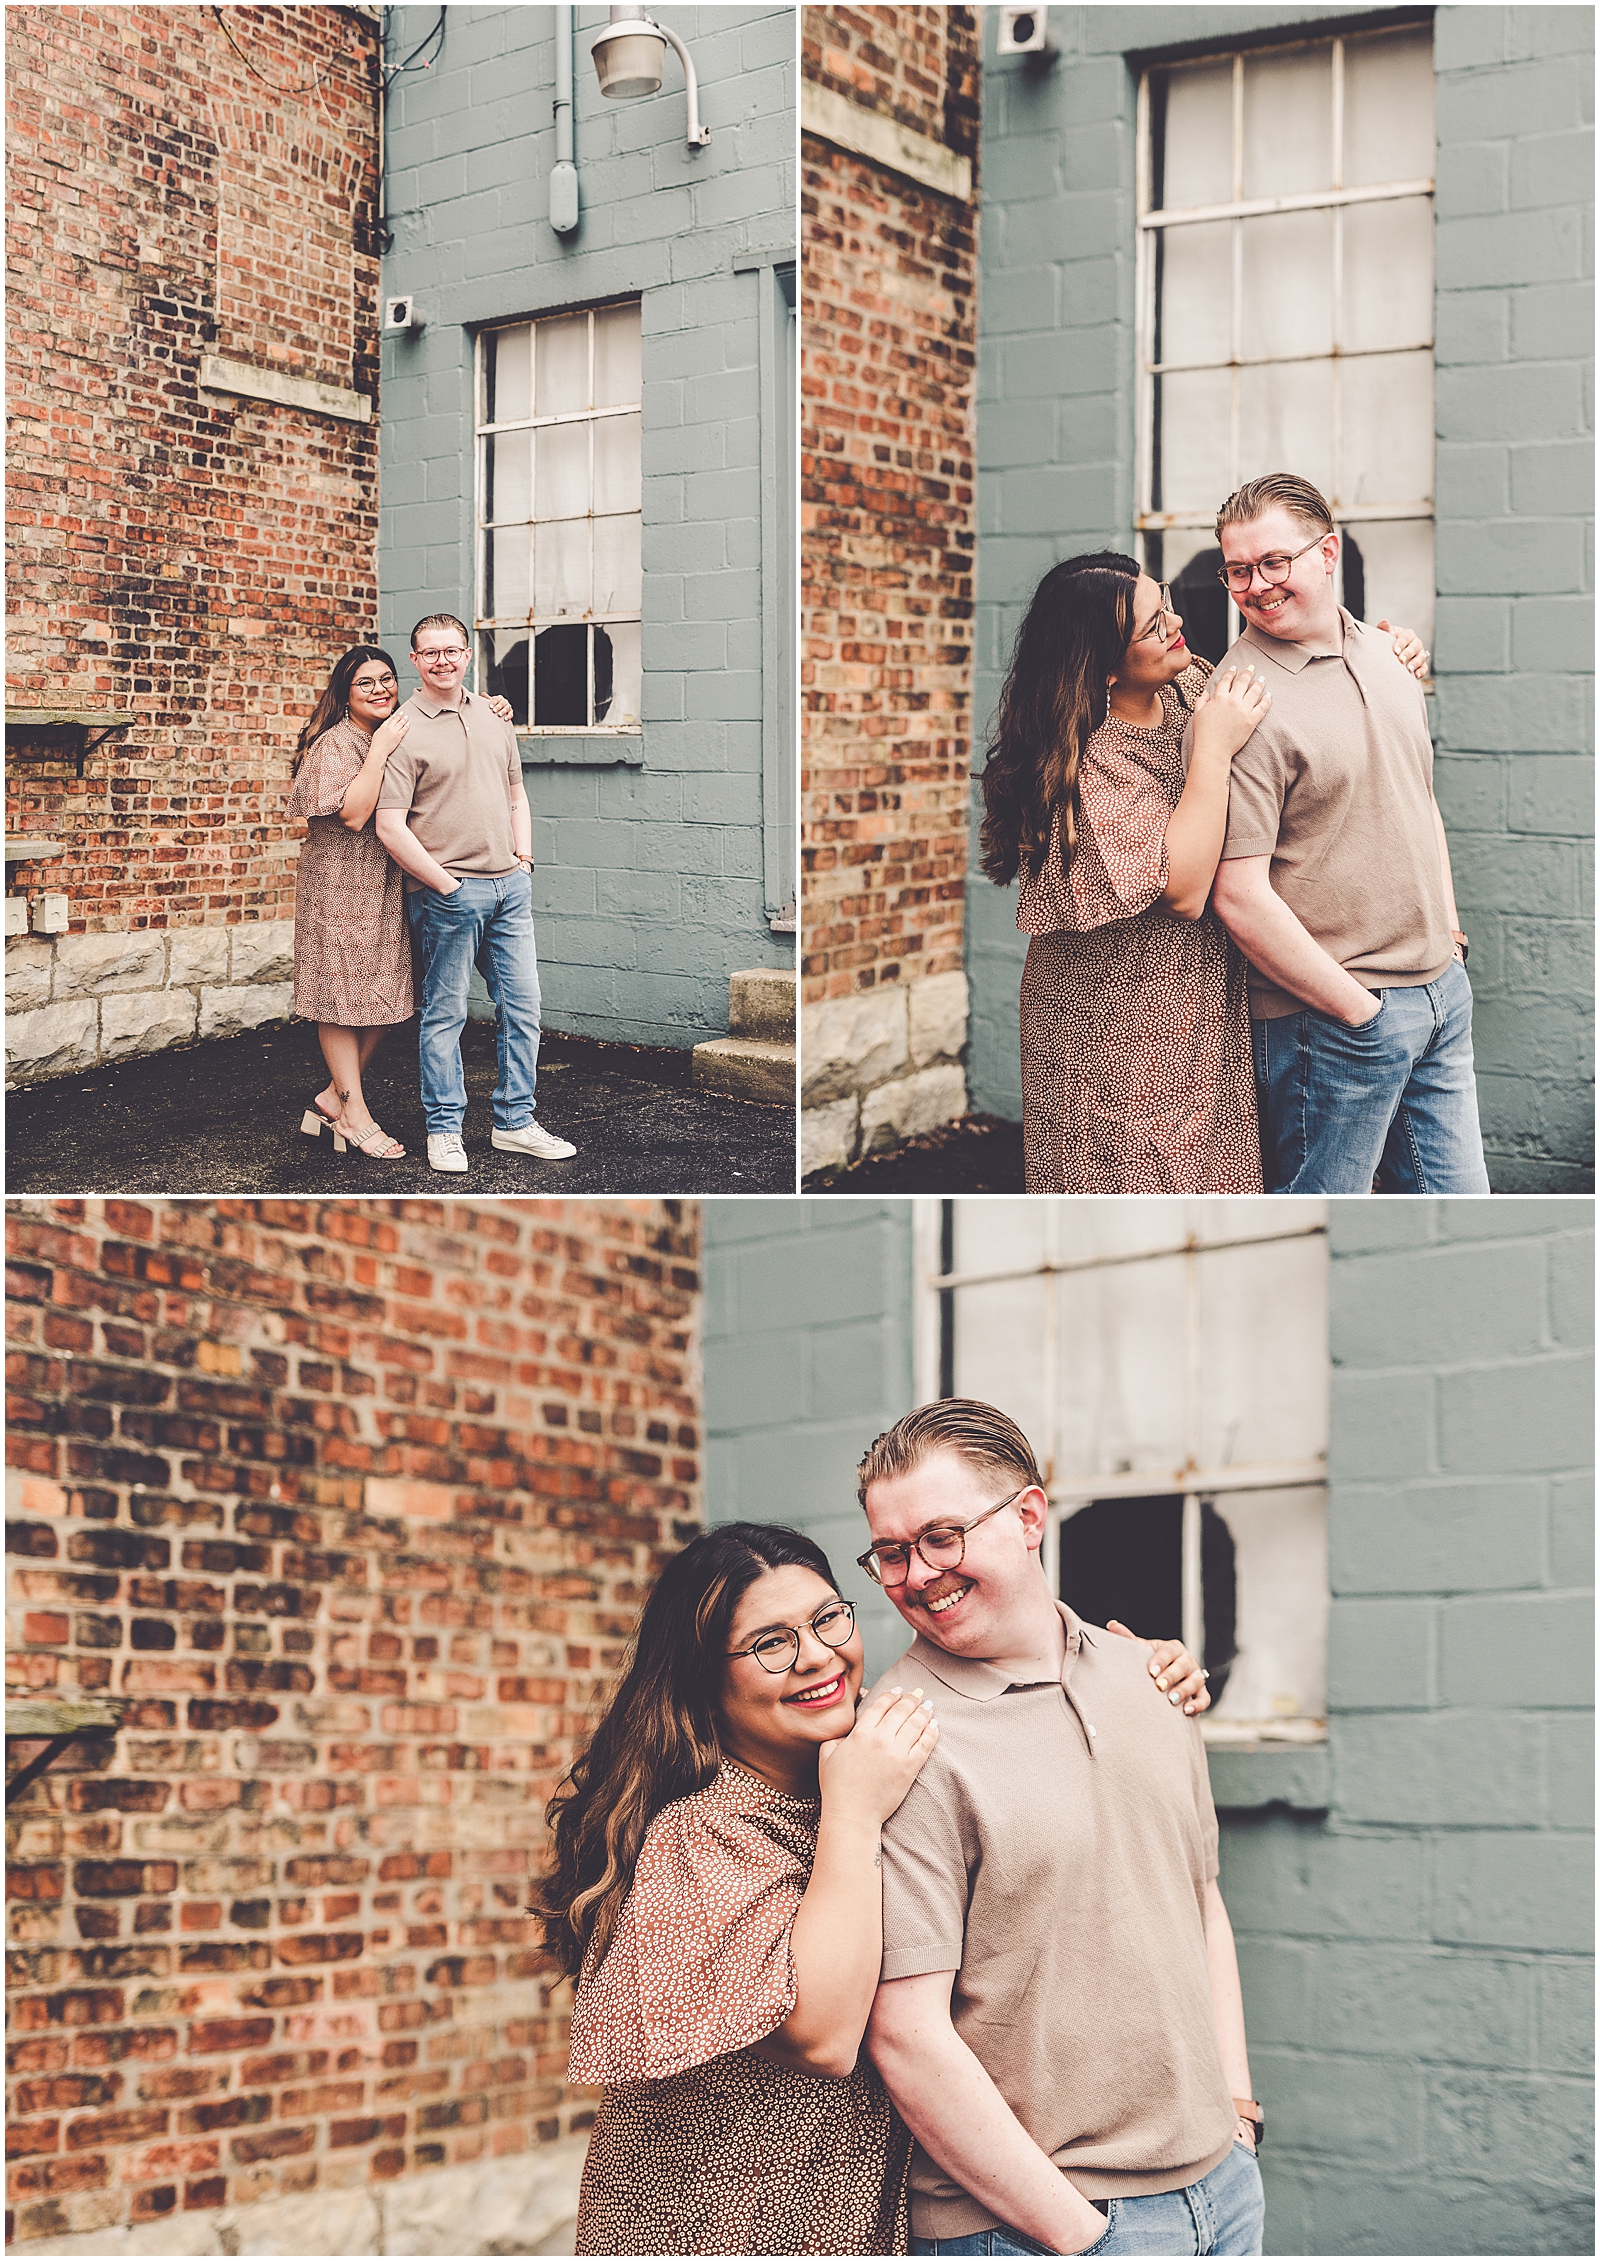 Spring couples session in Frankfort, Illinois with Chicagoland wedding photographer Kara Evans Photographer.